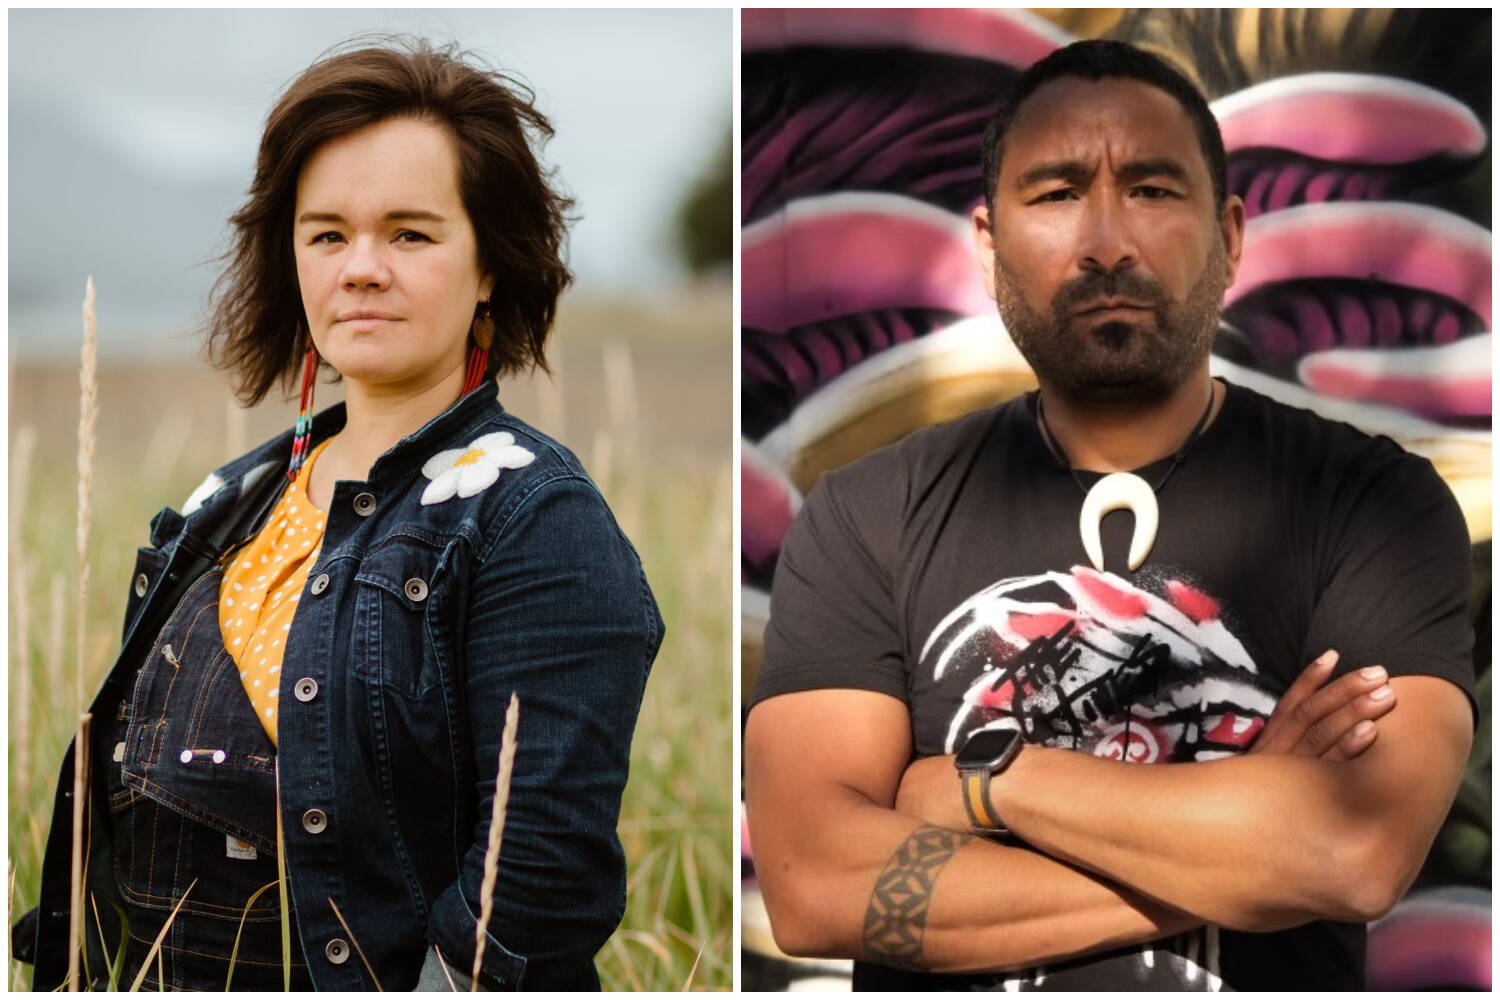 Alaska Native artists Lily Hope, left, and Stephen Qacung Blanchett, right, were selected as two of the fifteen Indigenous artists to receive $100,000 grants for upcoming projects by the Native Arts and Cultures Foundation. (Photo credit: @SydneyAkagiPhoto for Hope and Joy Denmert for Blanchett)